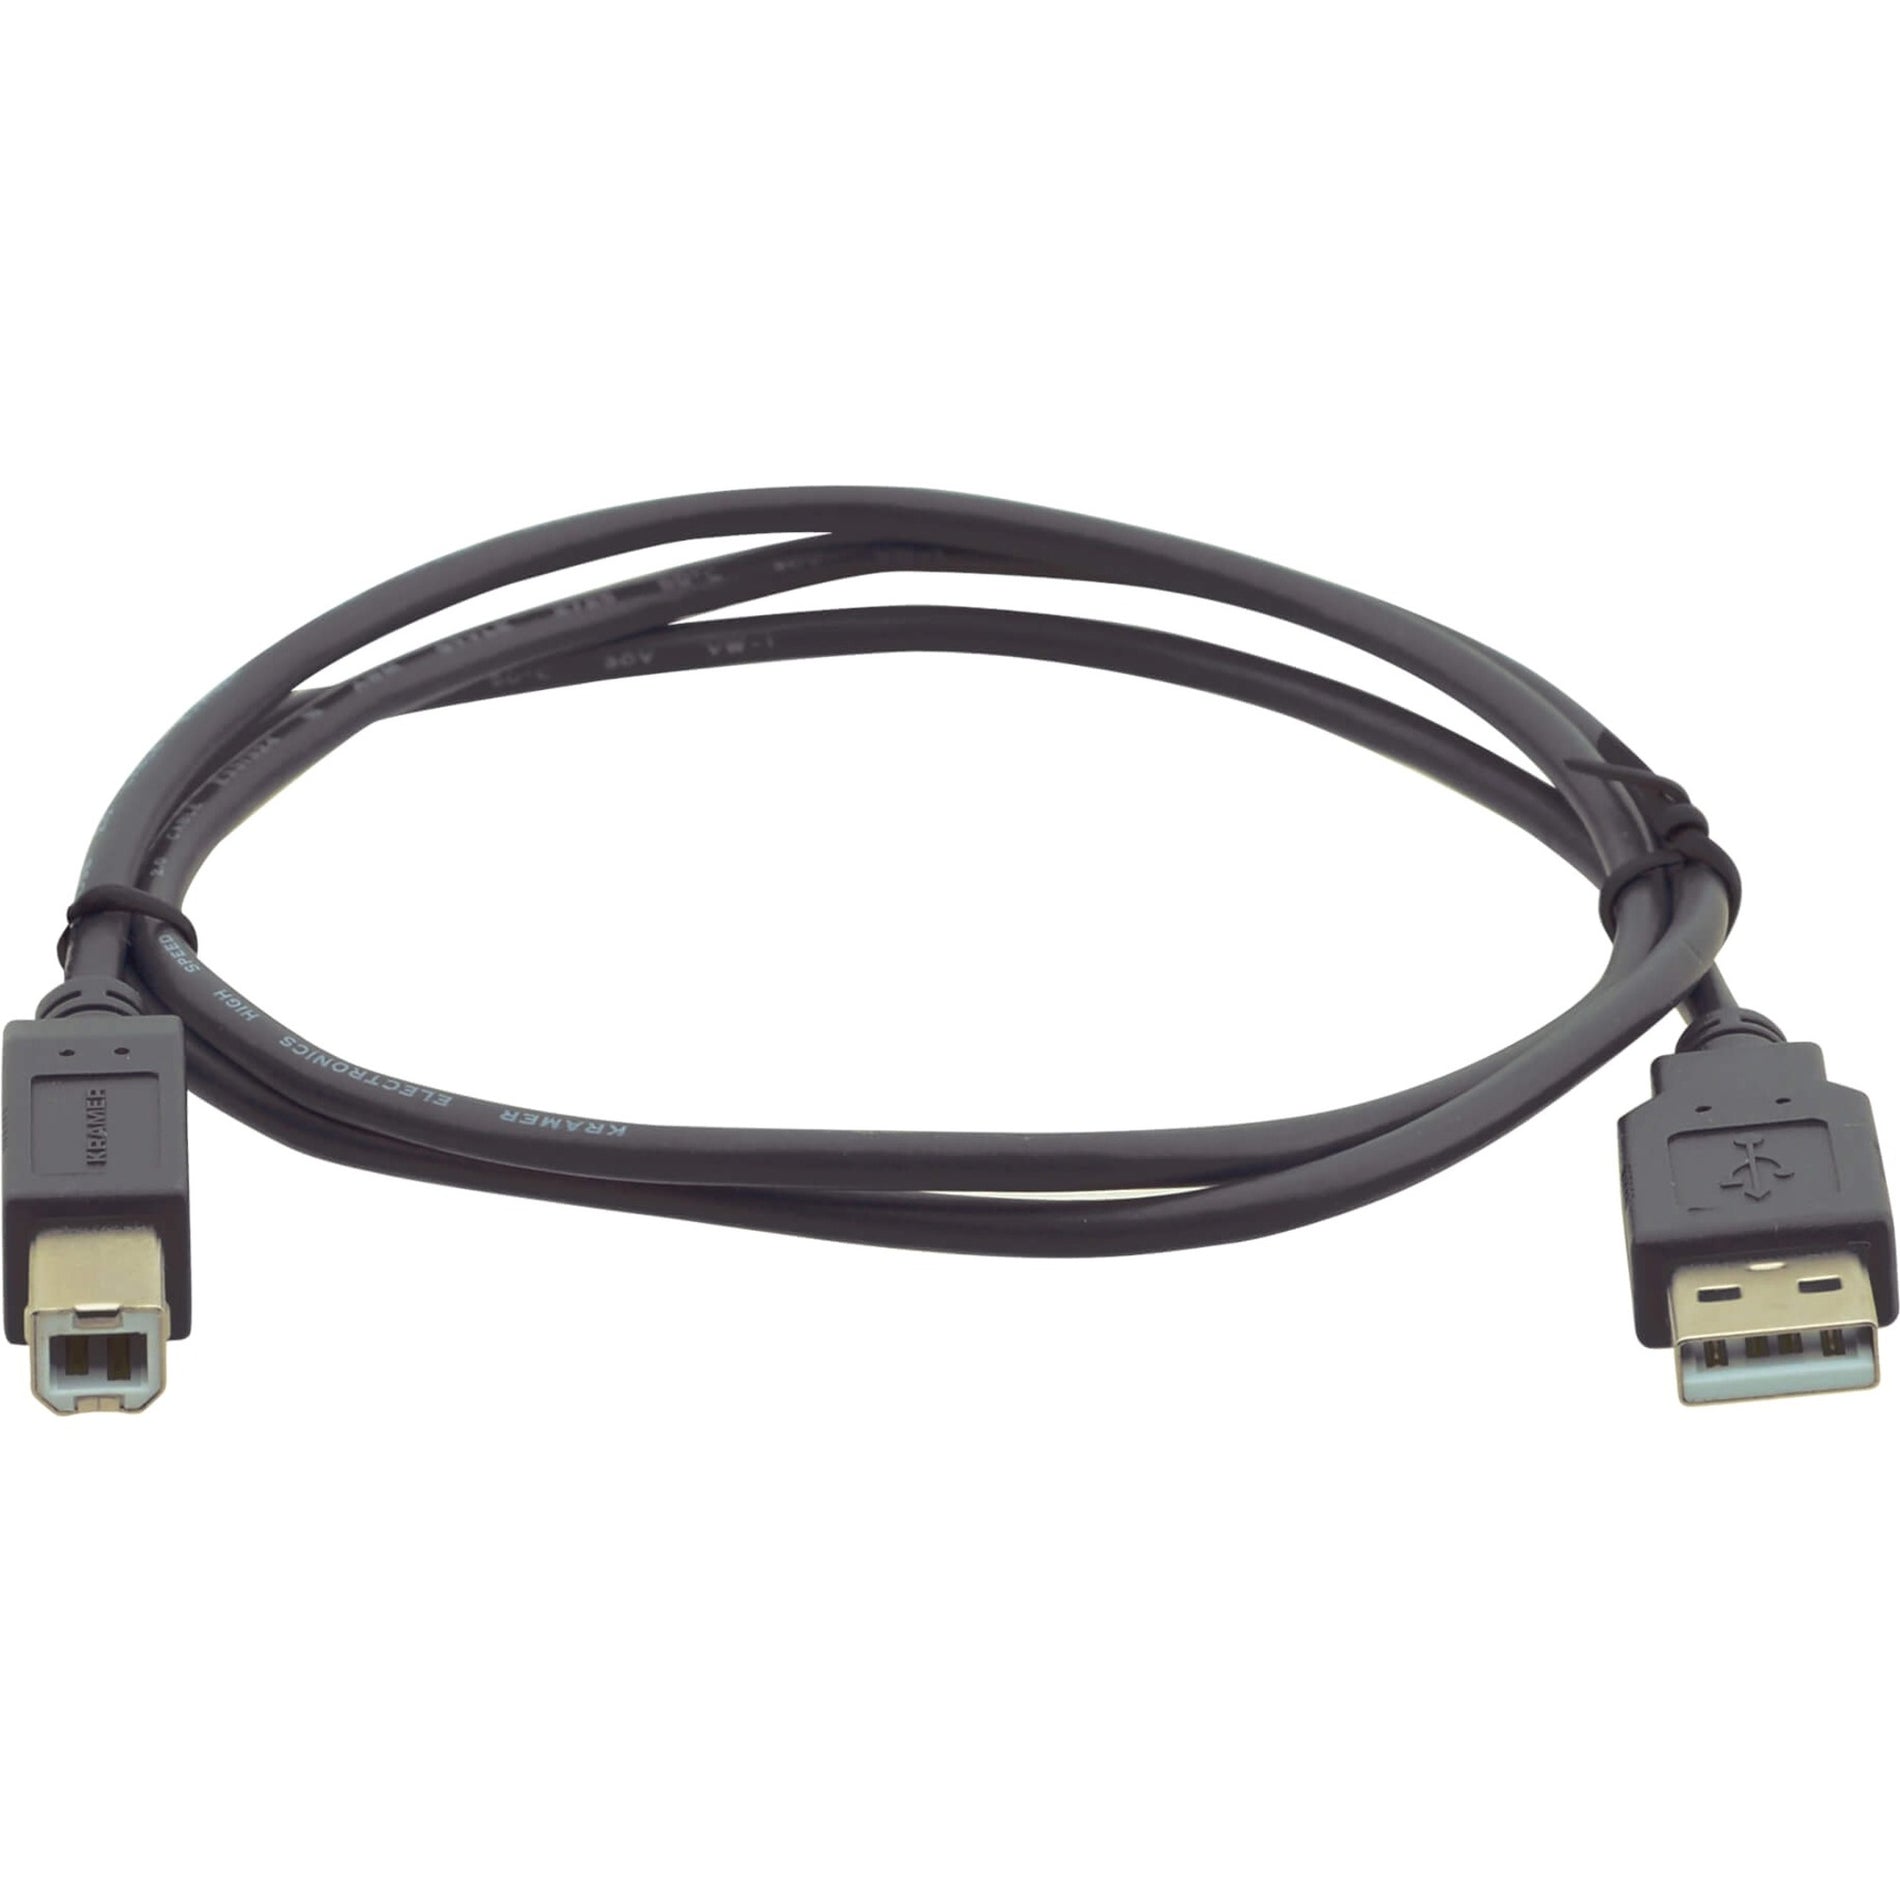 Kramer USB 2.0 Type A to Type B Printer Cable - 10' (96-0215010)